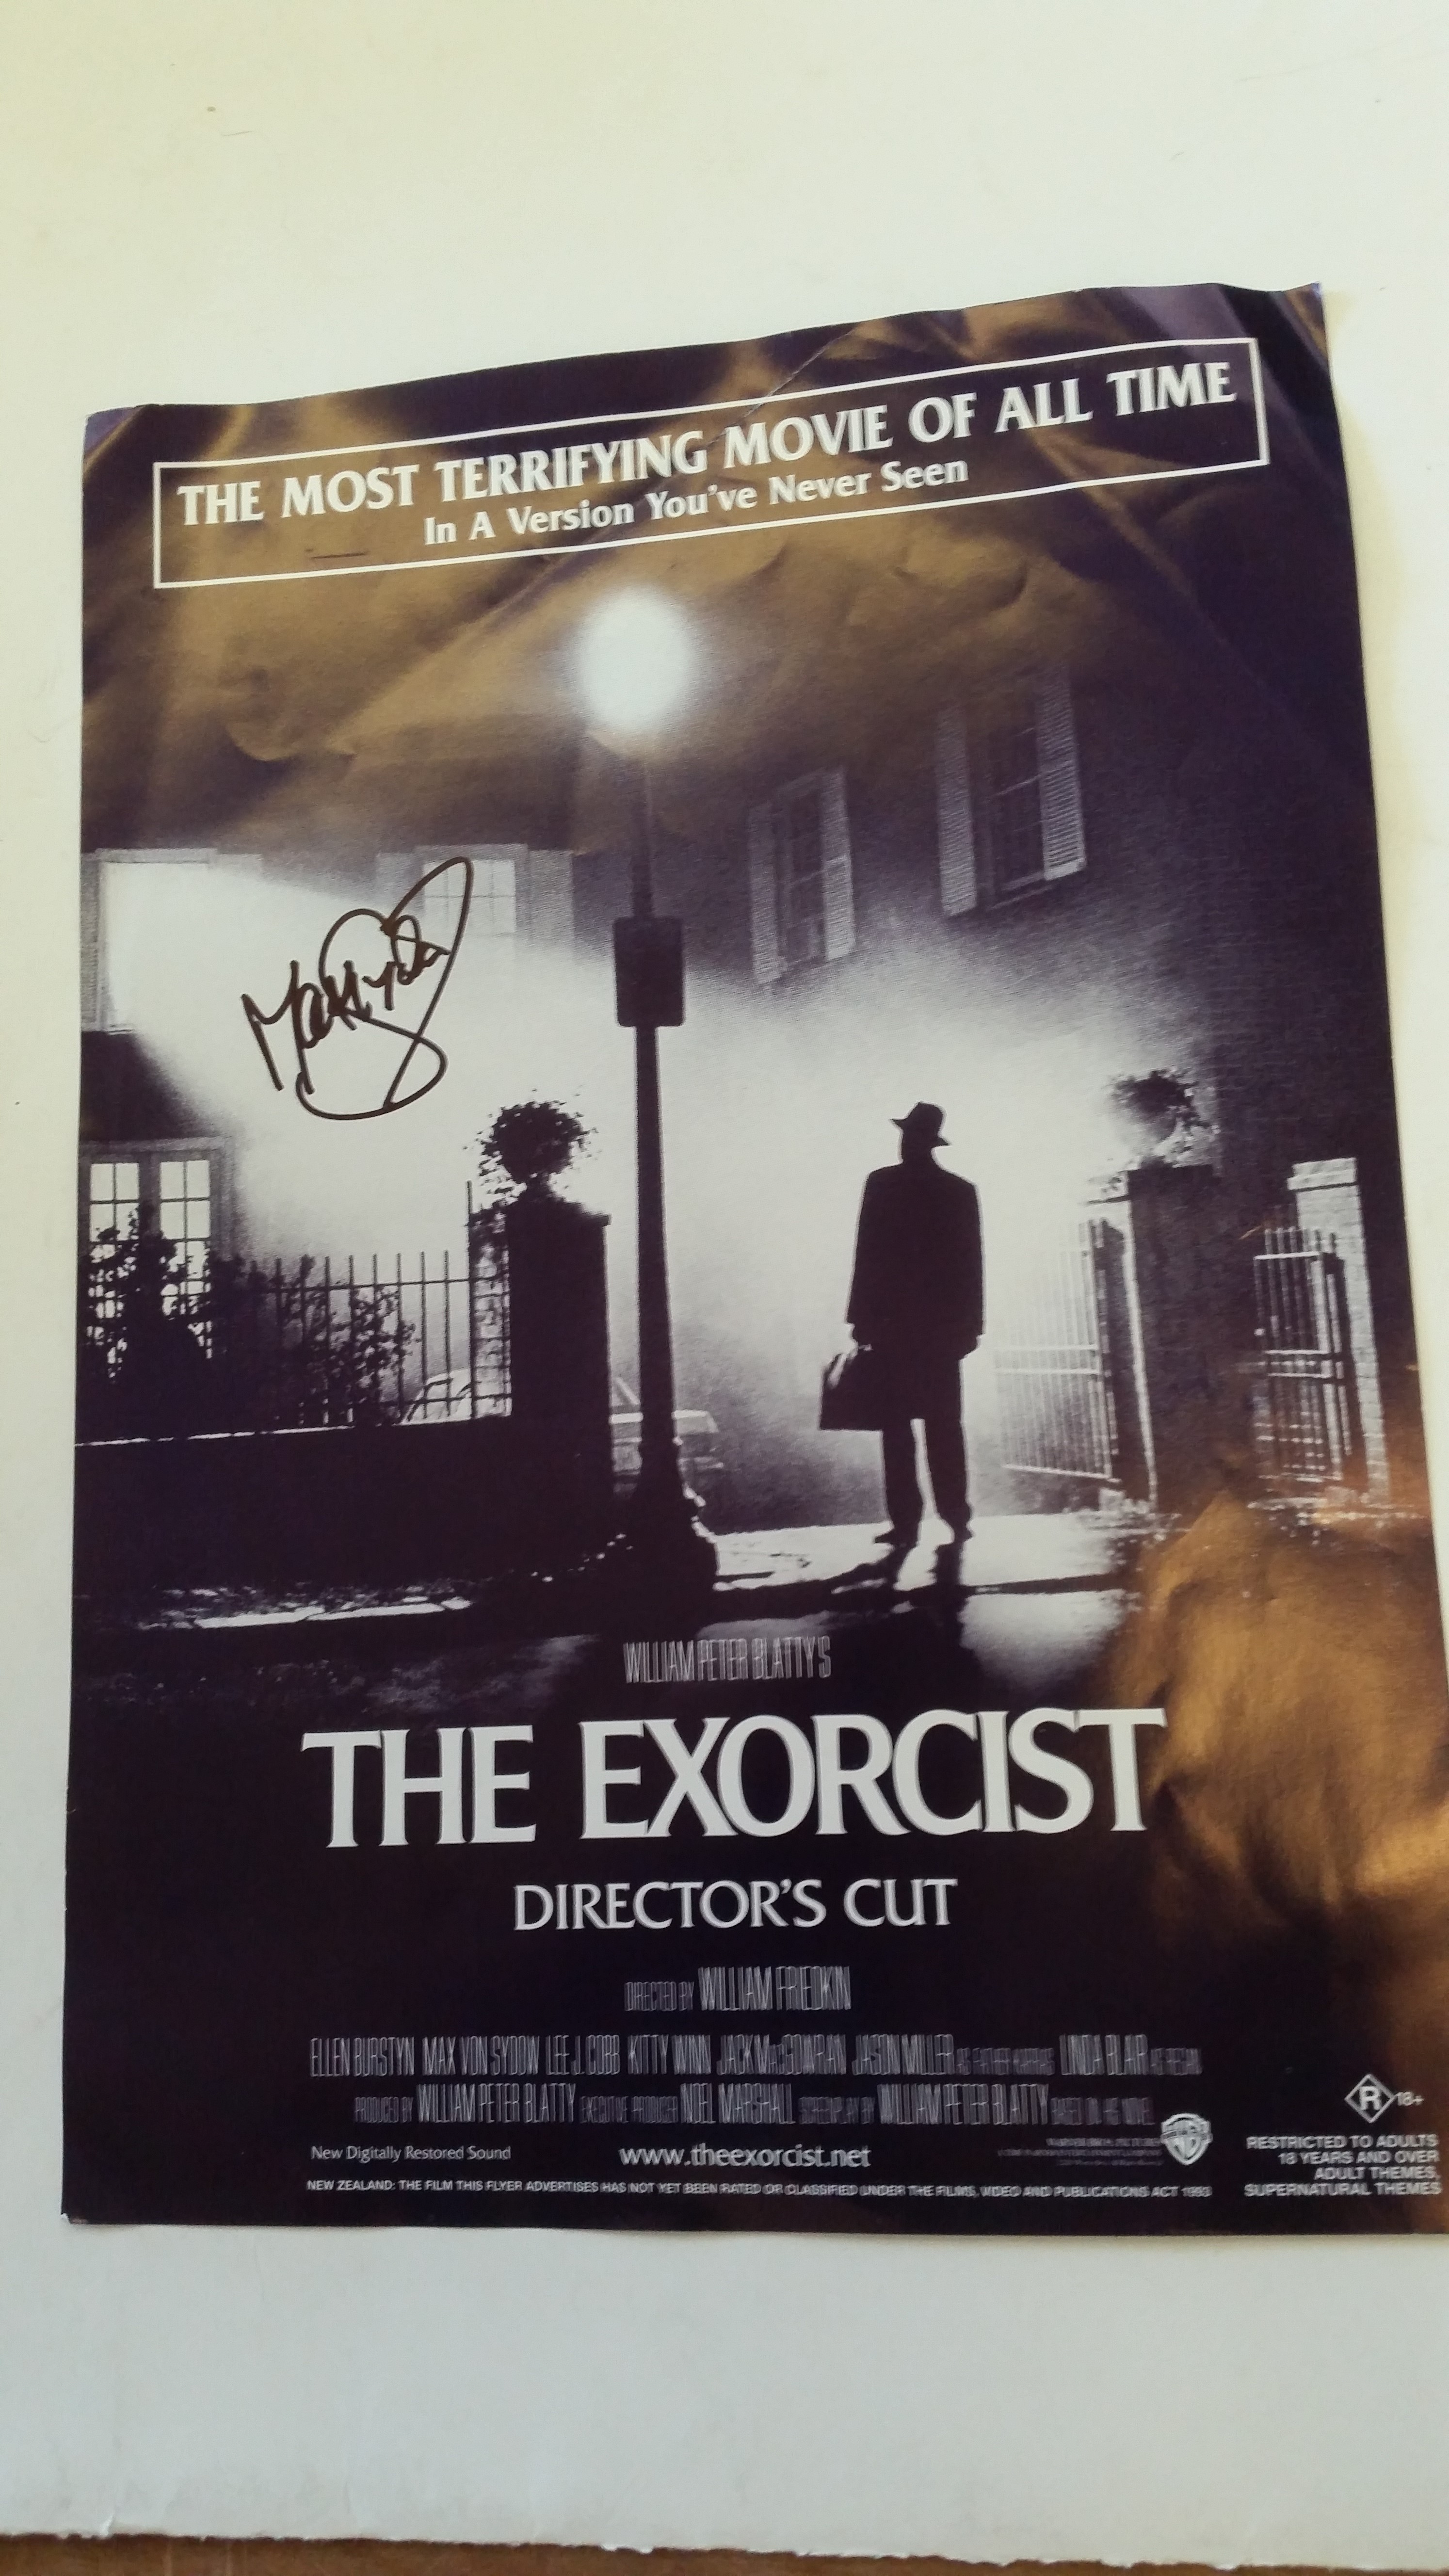 CINEMA, signed film flyer by Max von Sydow, The Exorcist - Directors Cut, EX